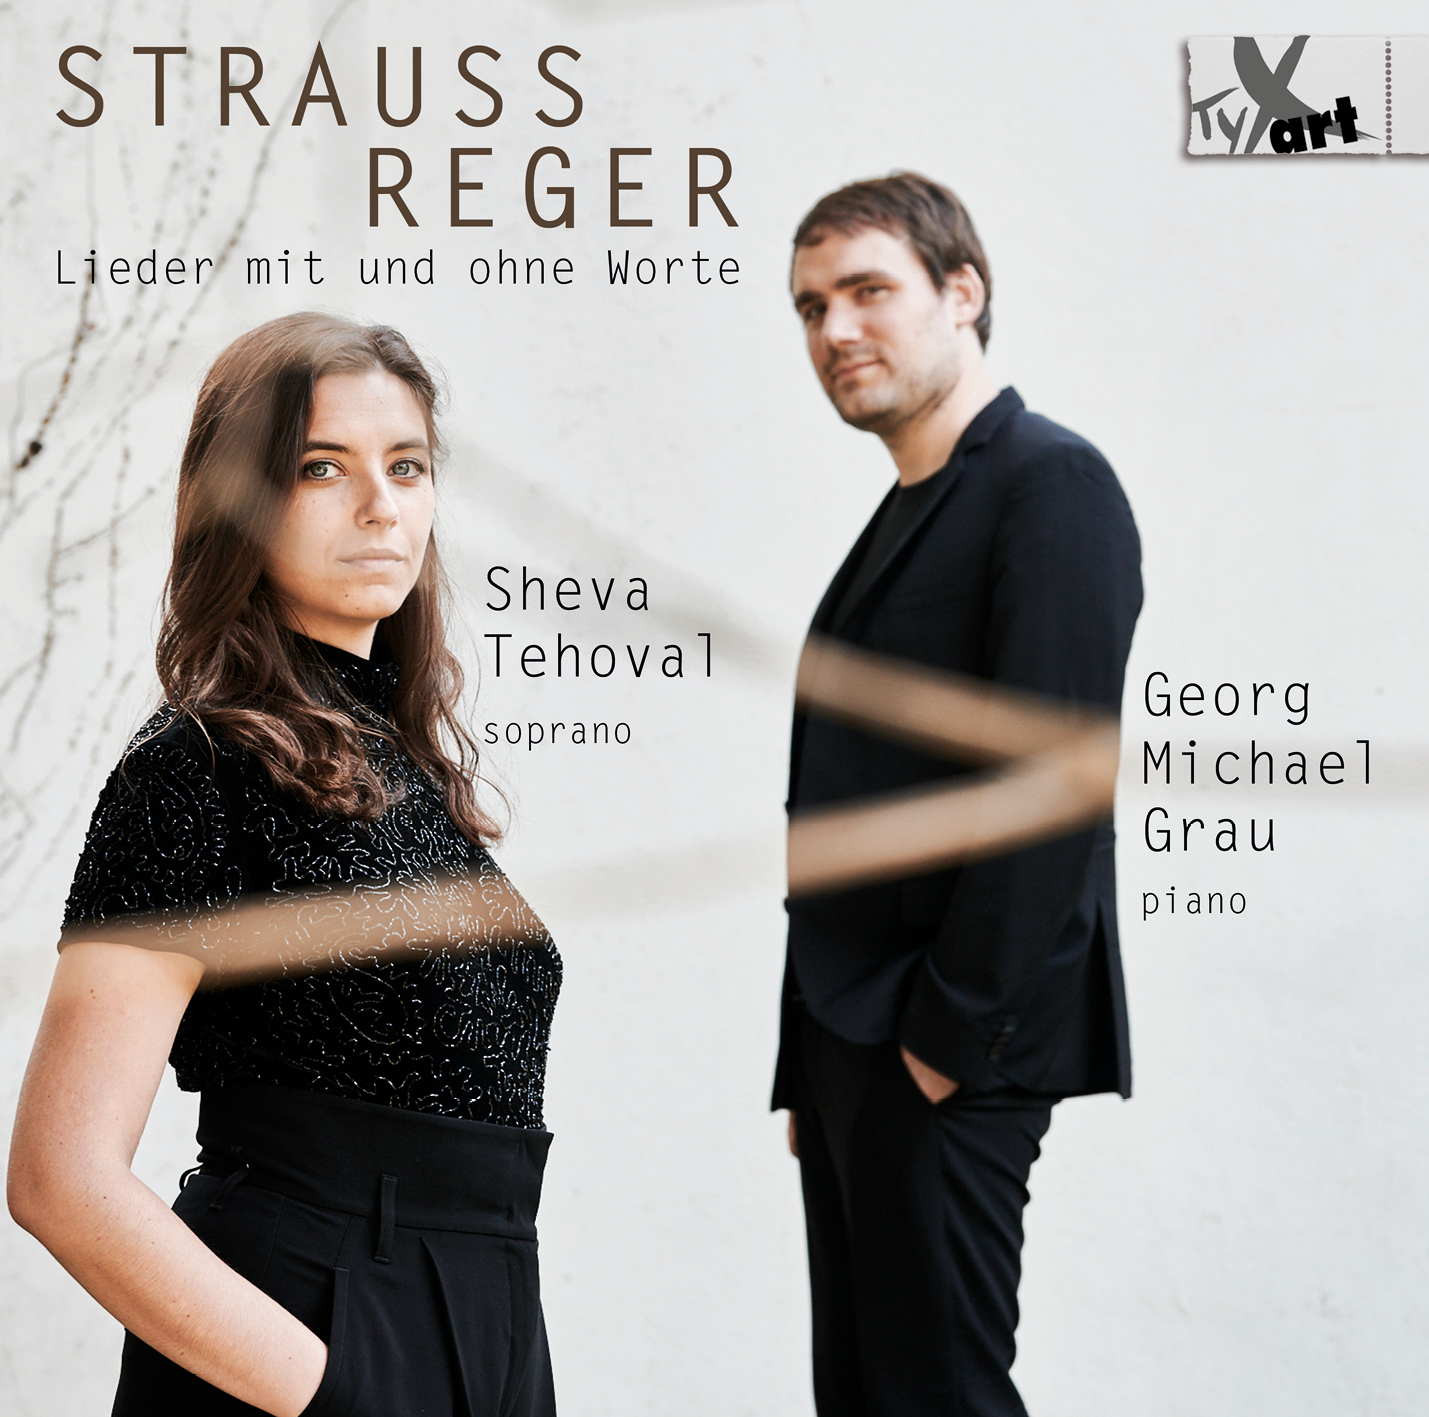 Richard Strauss - Max Reger: Lieder with and without words - Sheva Tehoval and Georg Michael Grau